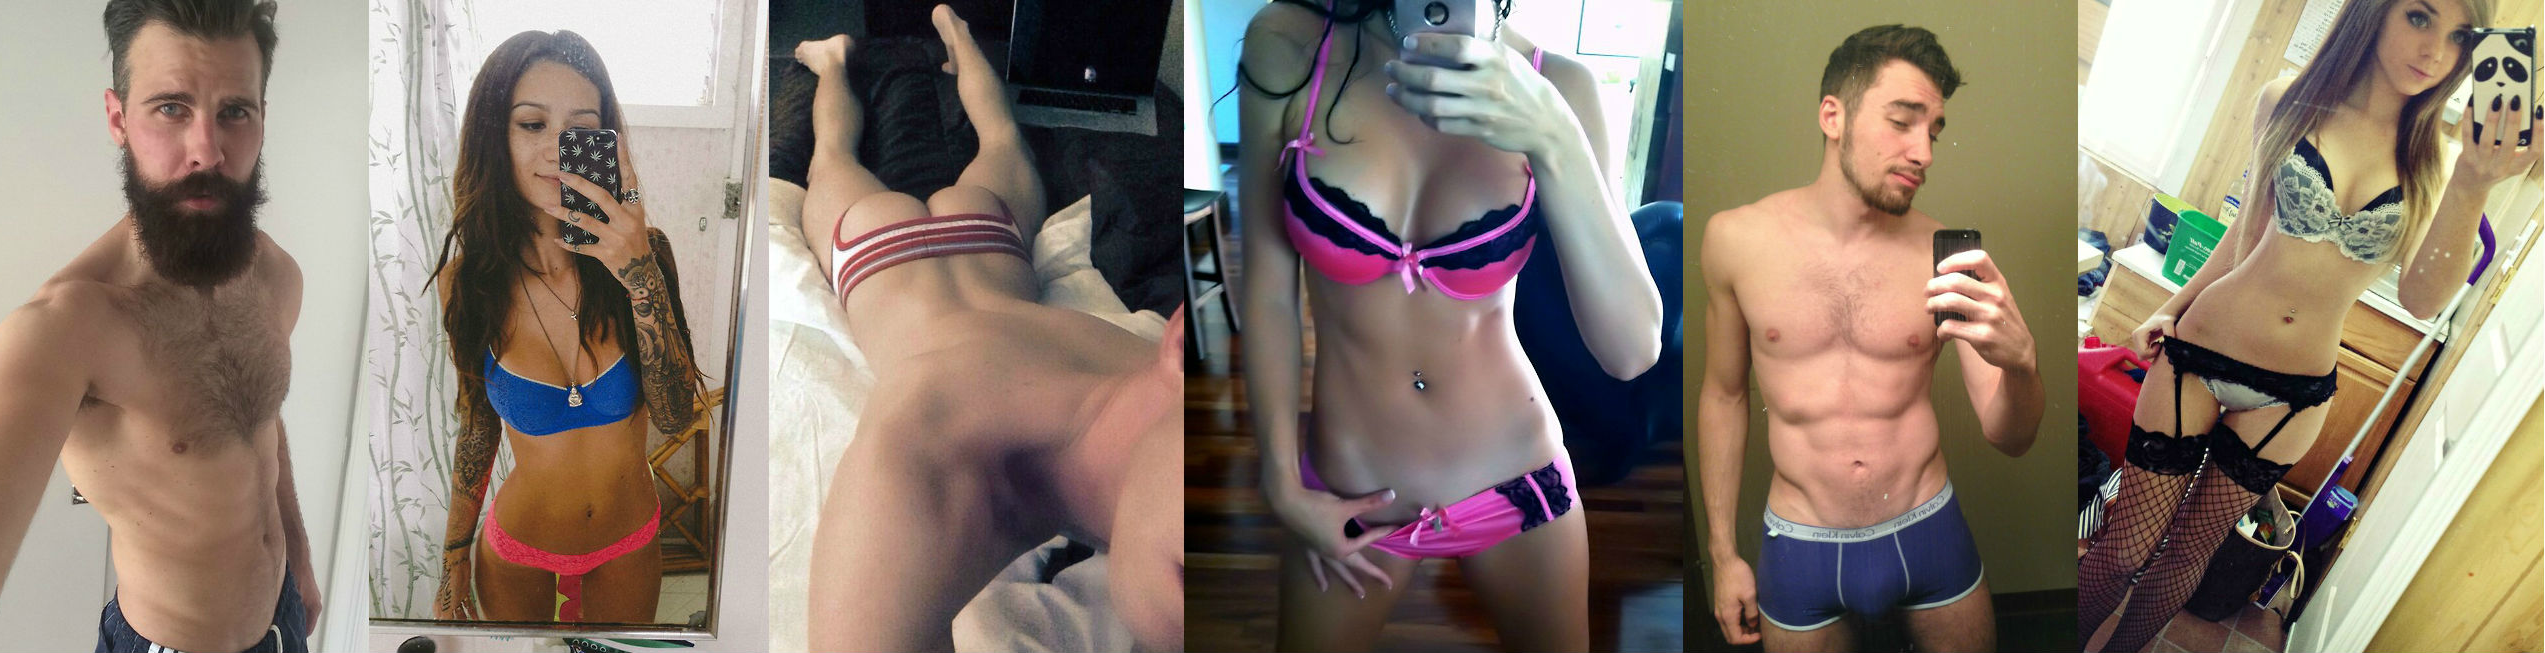 half naked selfies tumblr hipster collage